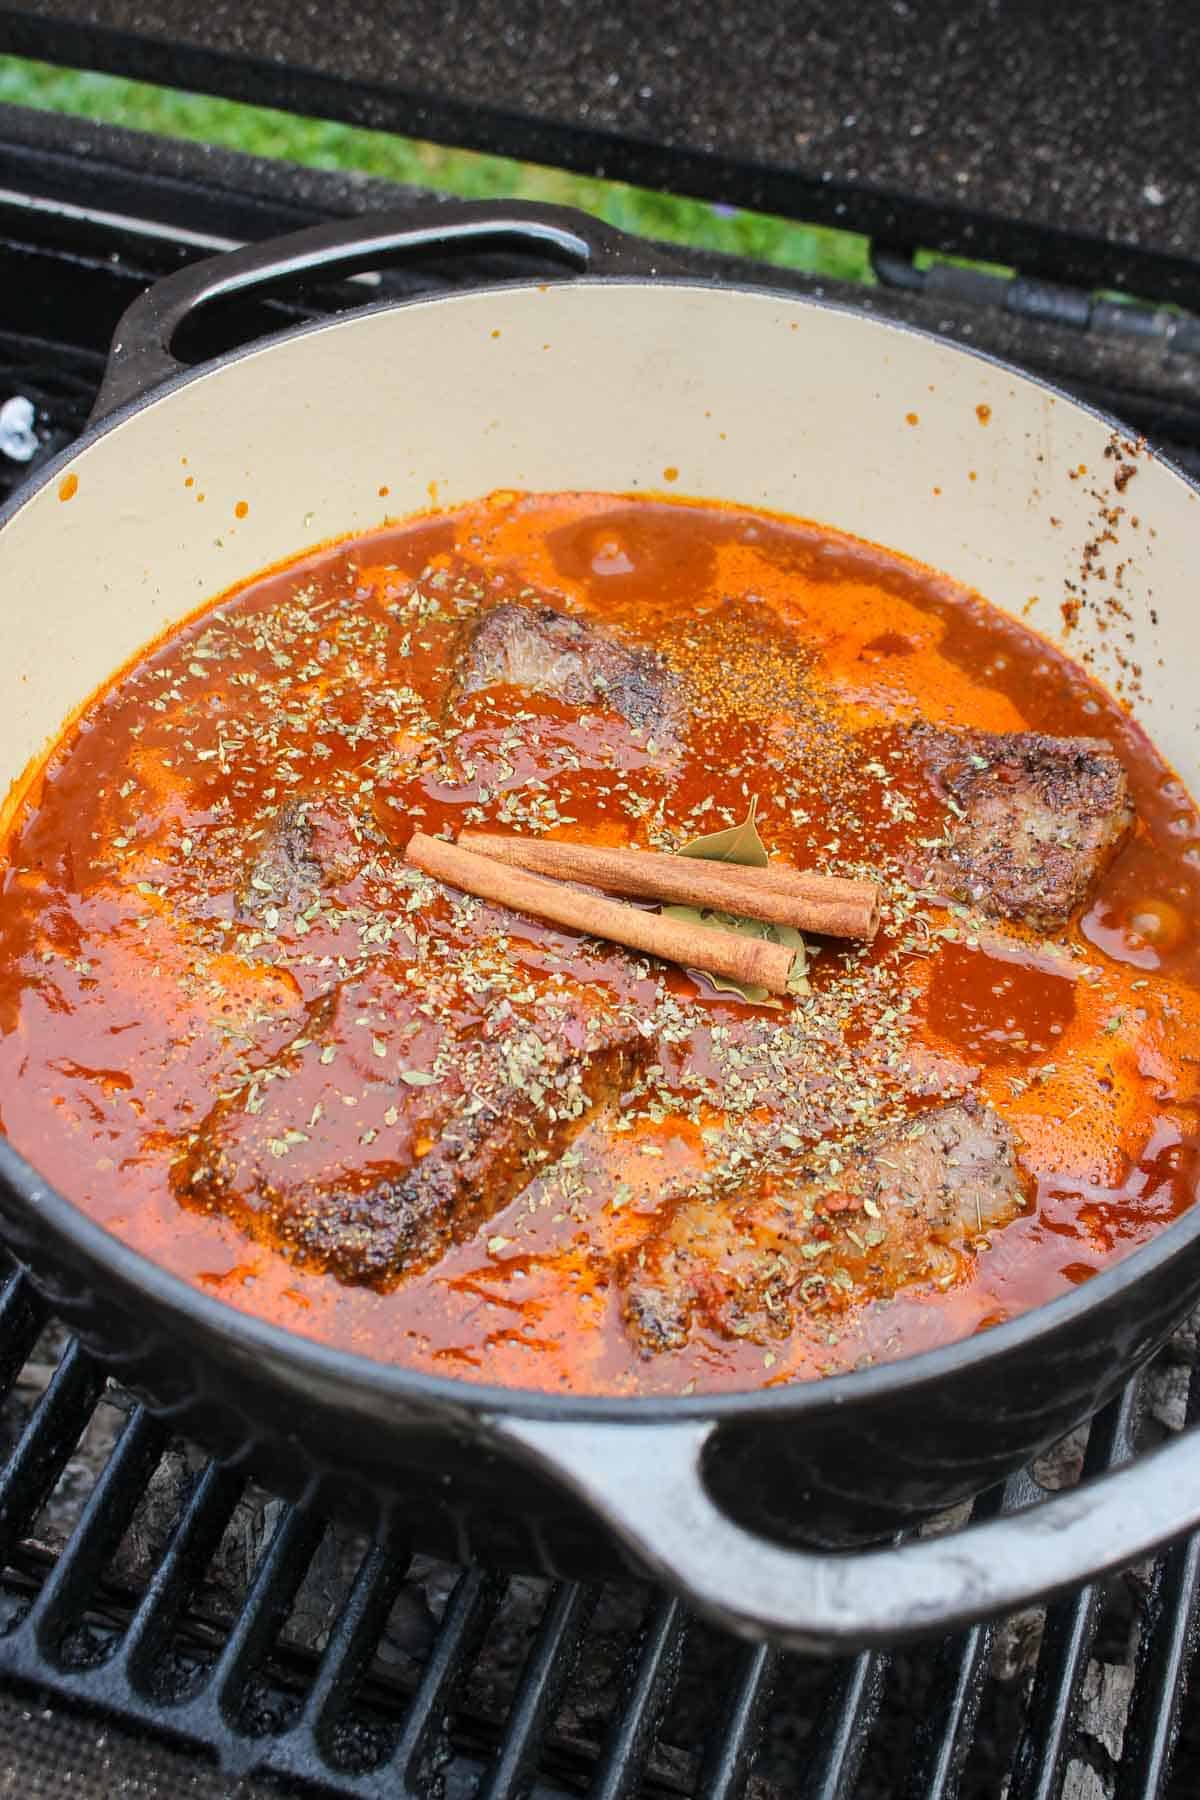 Adding the chili paste to the dutch oven so the short ribs can braise in it.